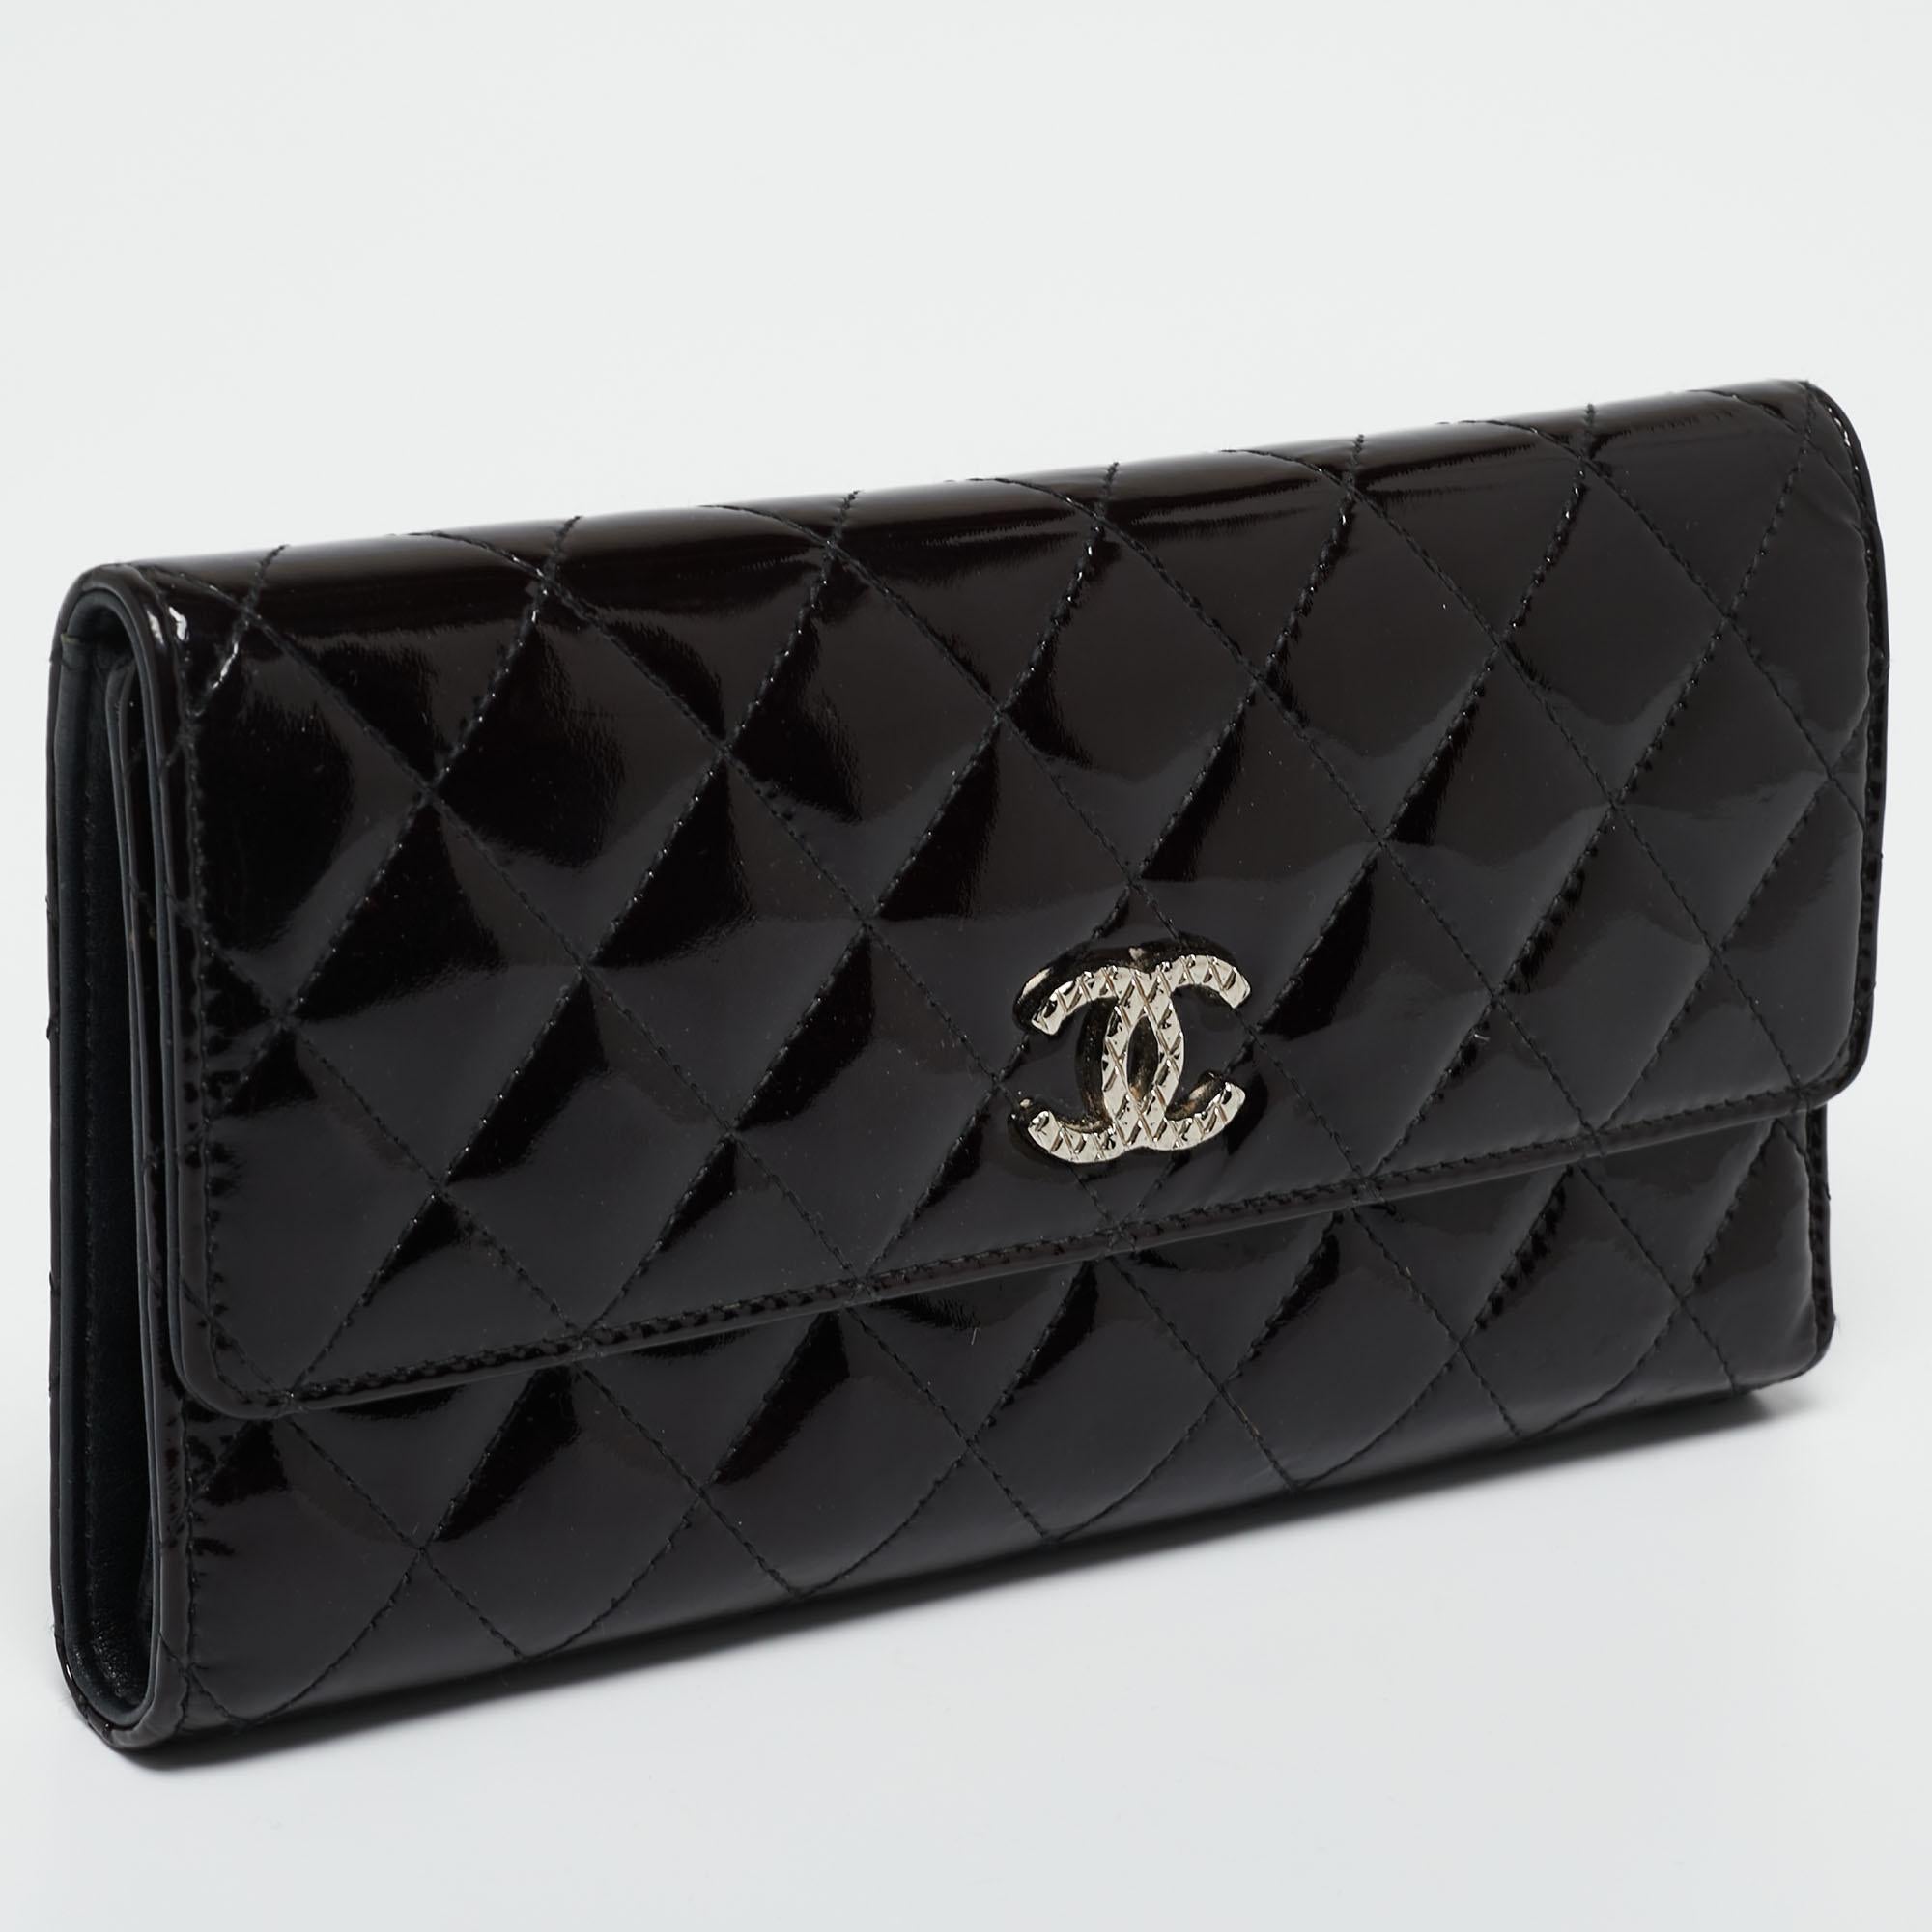 Women's Chanel Black Quilted Patent Leather CC Continental Wallet